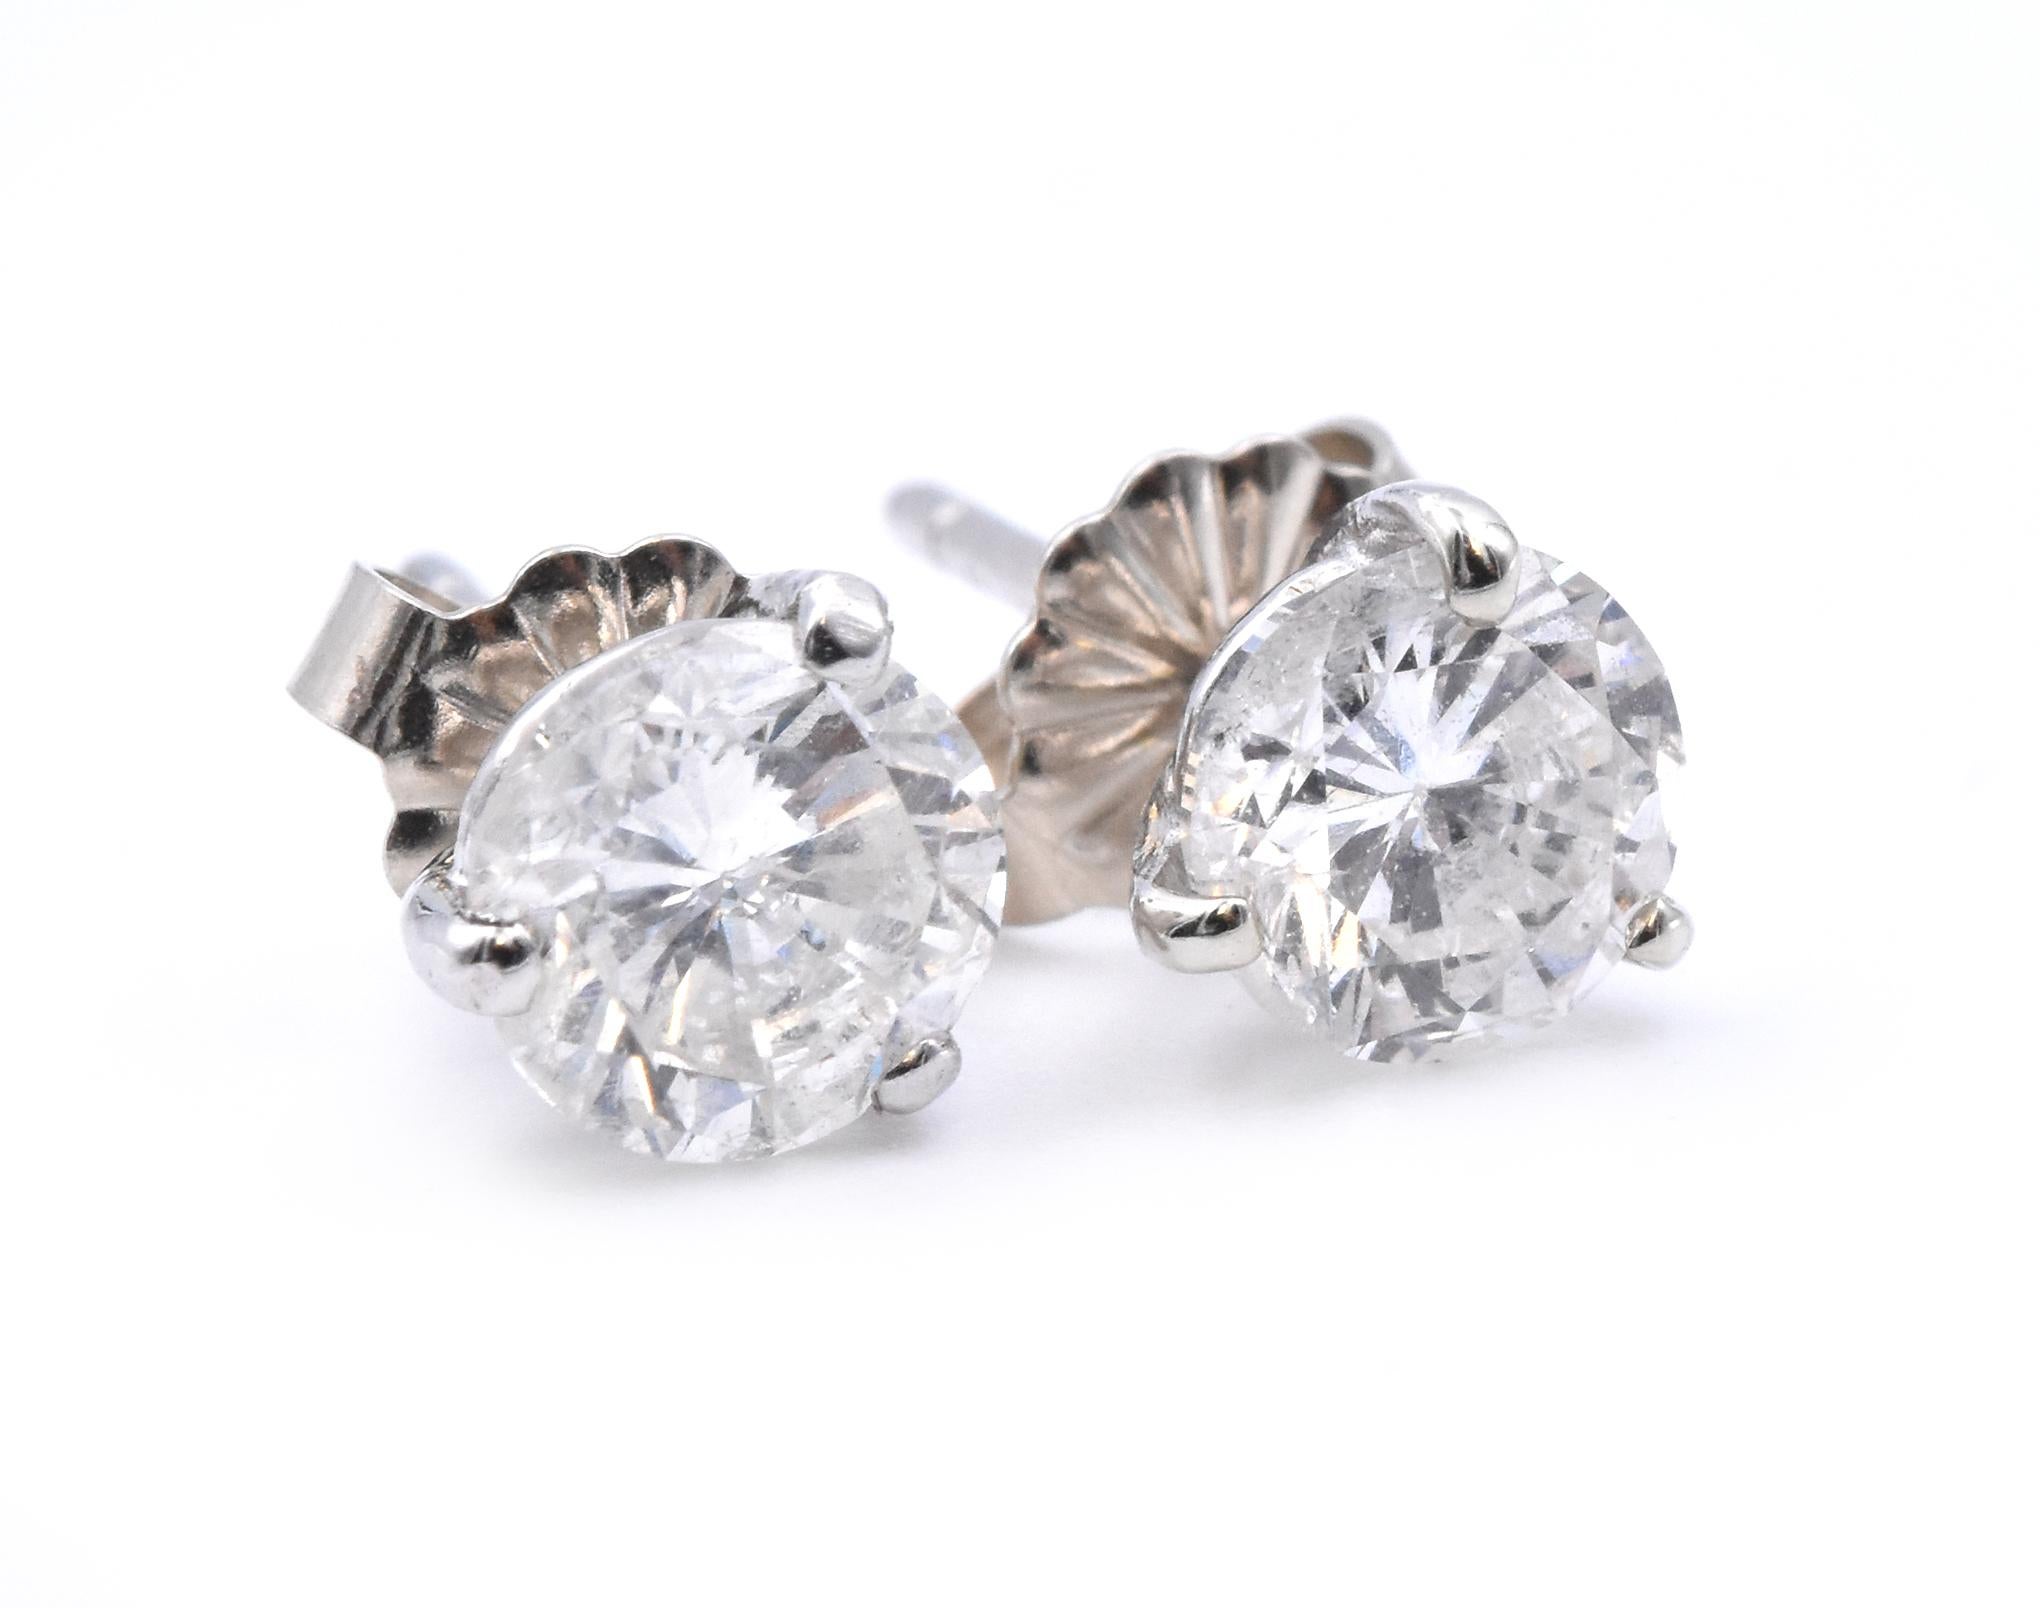 Material: platinum  
Diamond: 1 round brilliant cut = .67ct
Color: H
Clarity: I1
Diamond: 1 round brilliant cut = .70ct
Color: H
Clarity: I1
Dimensions: earrings measure approximately 5.7mm
Fastenings: post with friction backs 
Weight:  1.4 grams